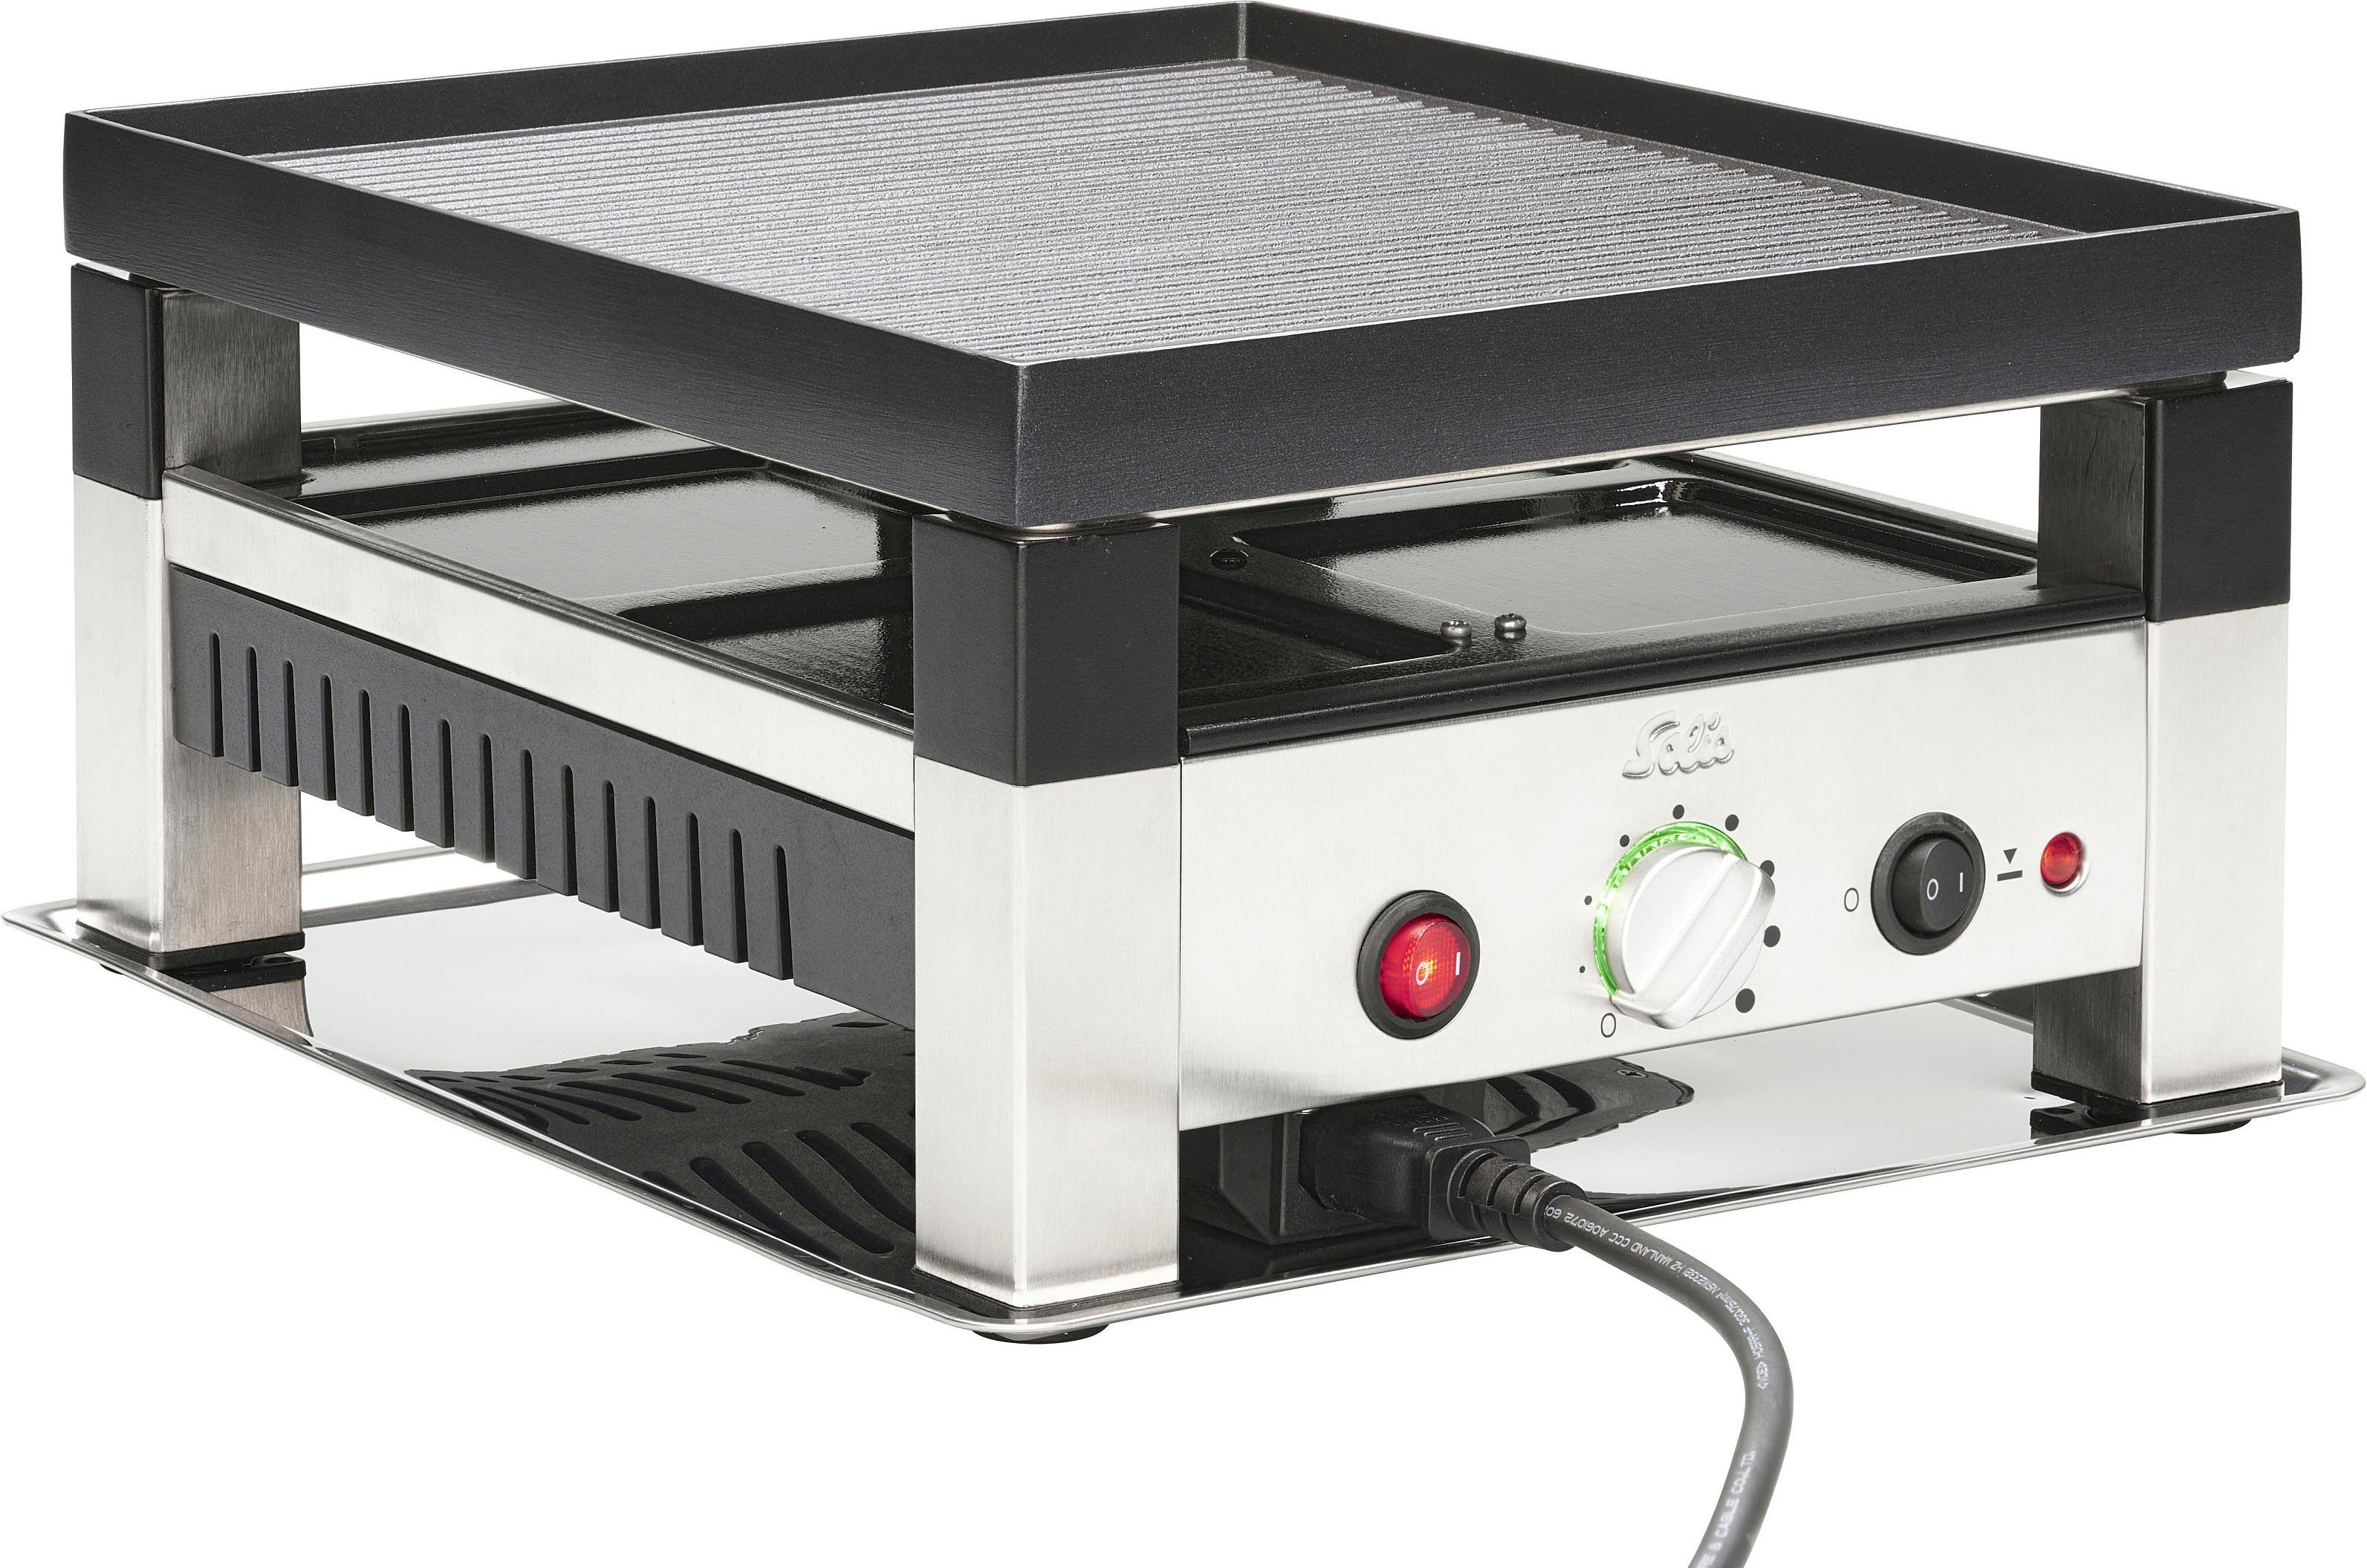 OF 5 W 1 1020 Table SWITZERLAND SOLIS 4, Raclette Grill 4 in Raclettepfännchen, for